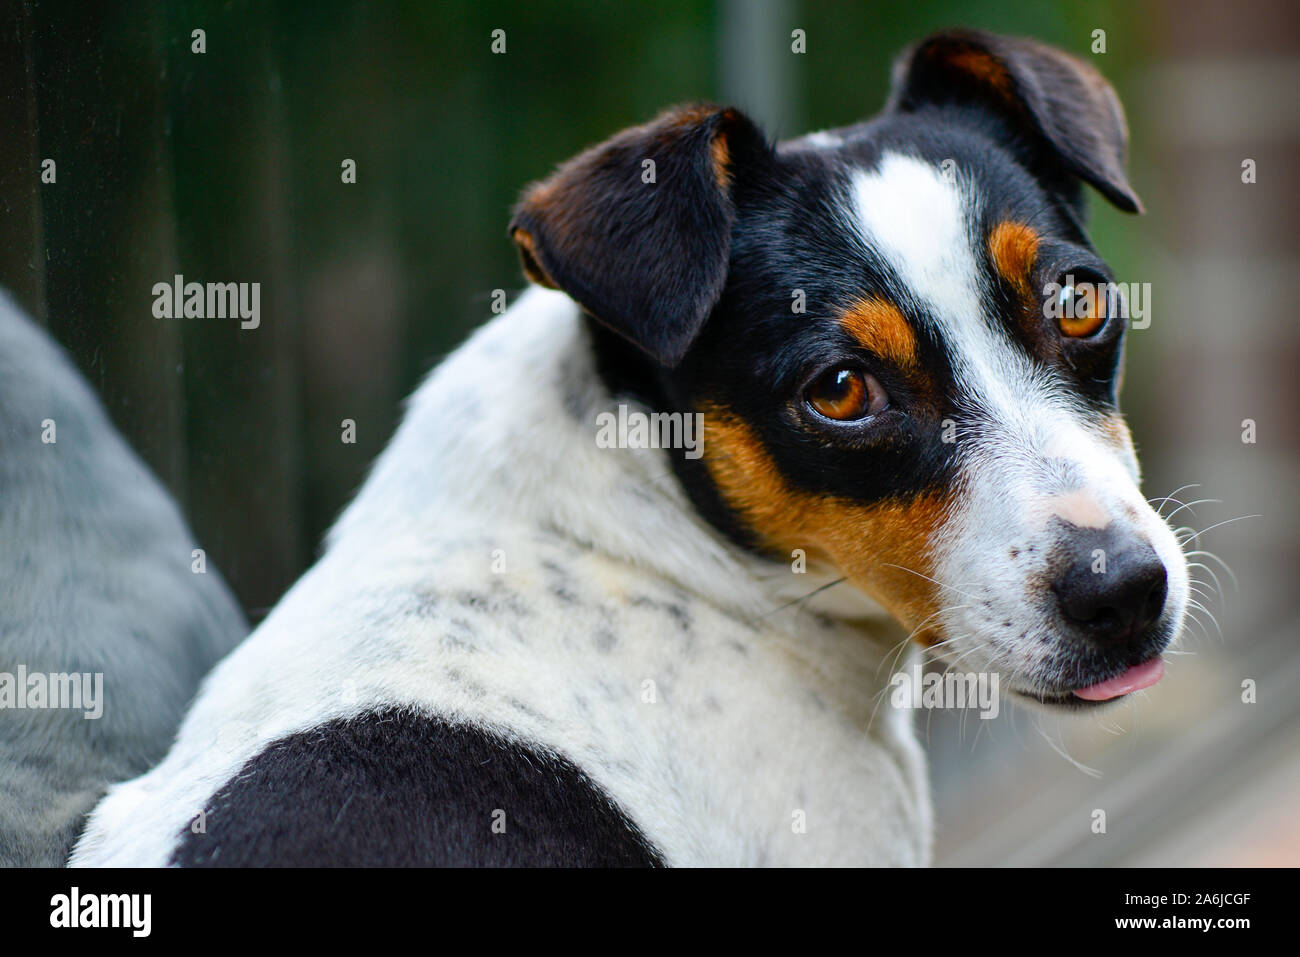 Cute Jack Russell Short Hair and Short Leg White Black and Brown Dog Sitting and Looking and Turning Around with Tongue Partly Out Stock Photo